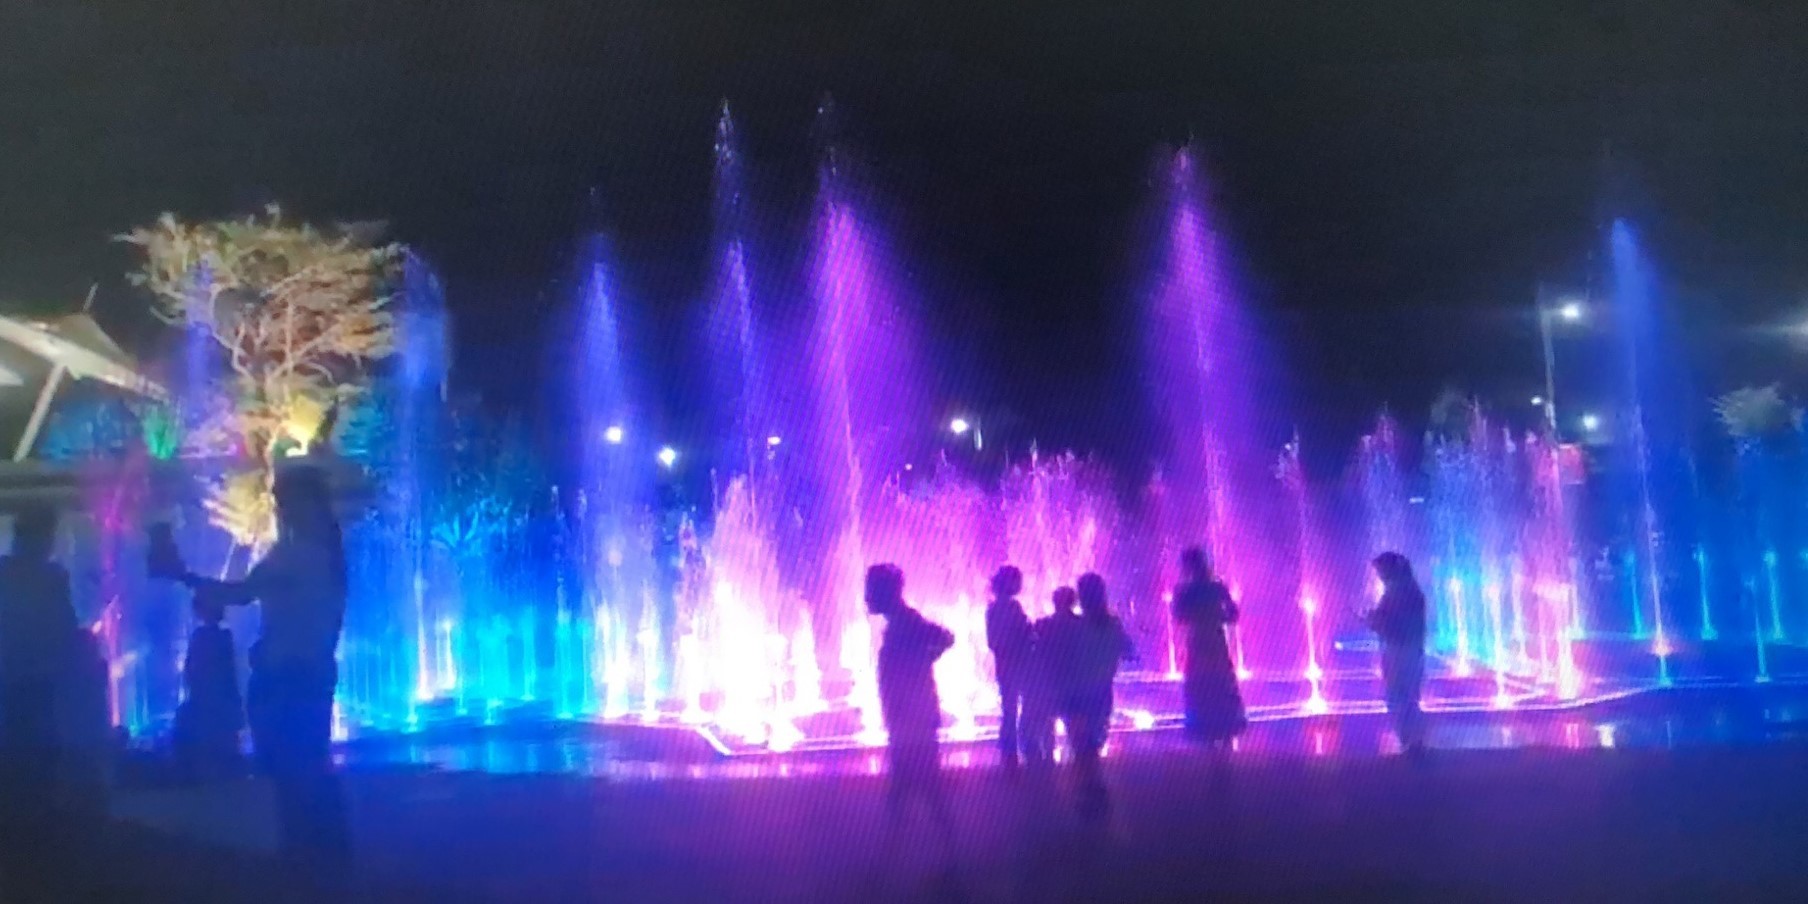 Music Fountain in the Dry Pool of the Municipal Square in Cangwu County, Wuzhou City, Guangxi Province